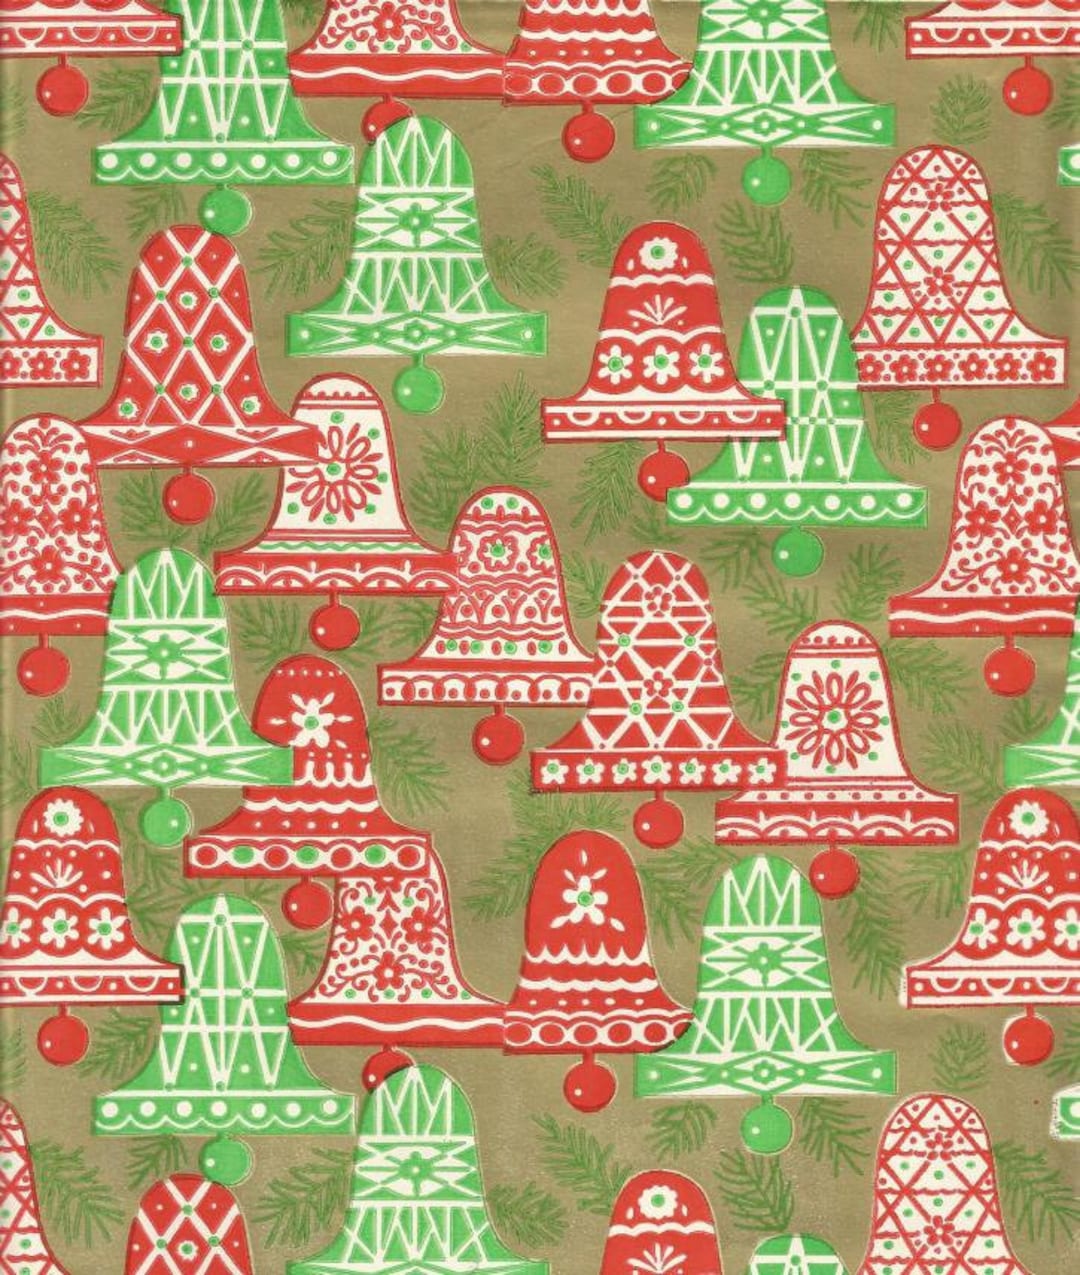 Vintage Christmas Wrapping Paper Red and Green Christmas Bells Gold Trim Red  Ribbons Mistletoe One Flat Sheet 1950s-early 1960s Gift Wrap 